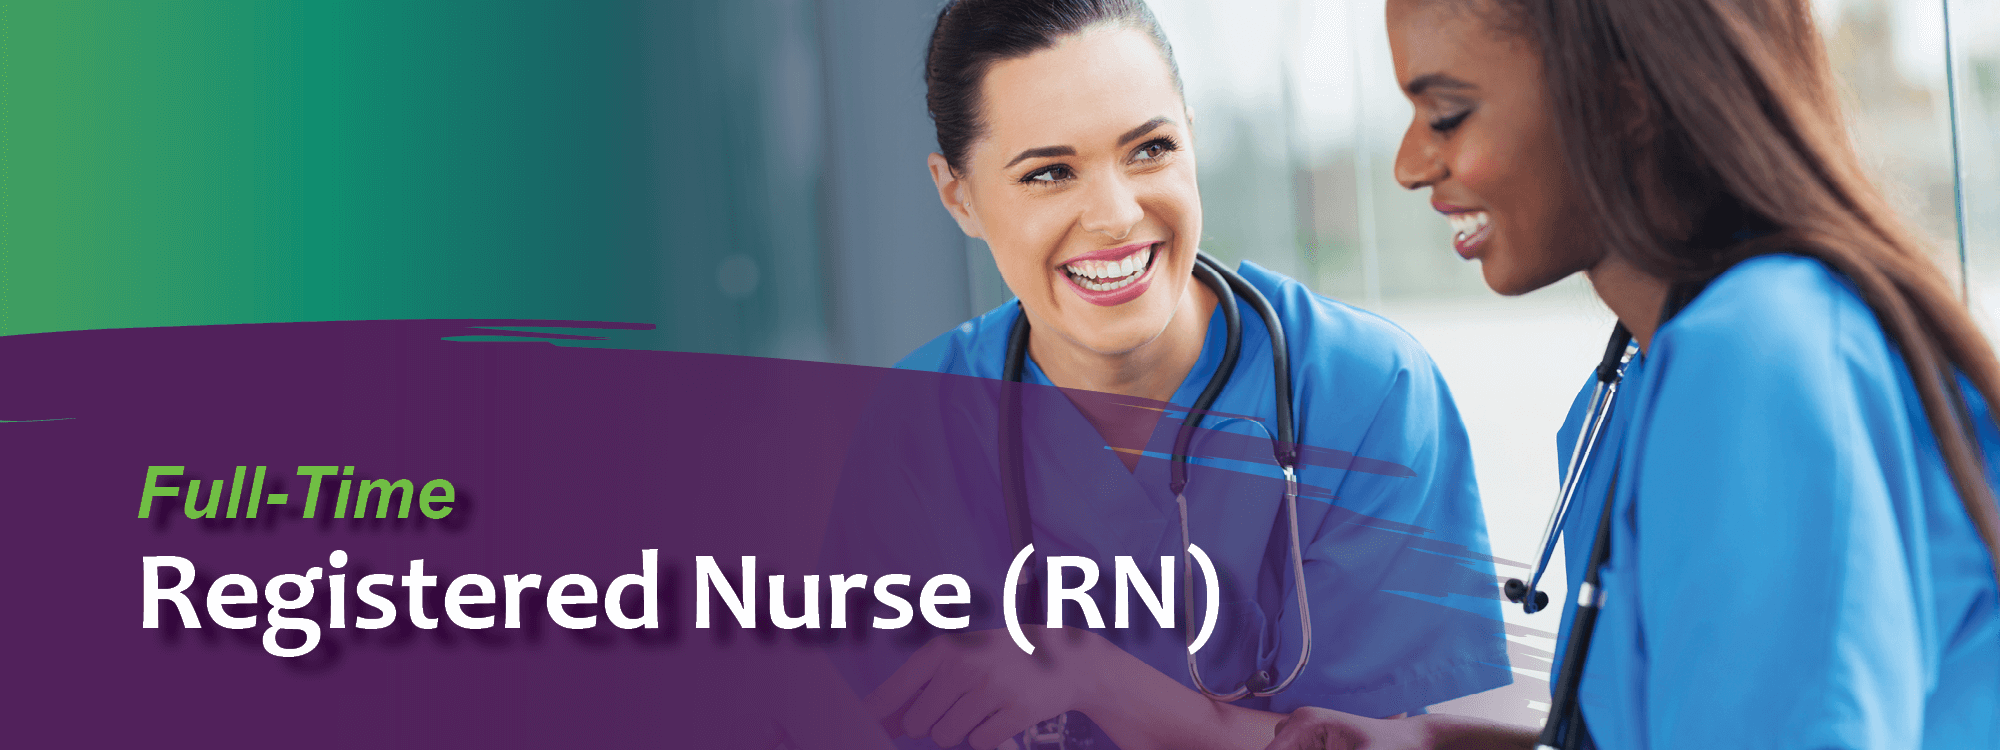 Two nurses talking to each other. Image Text: Full-time Registered nurse (rn)